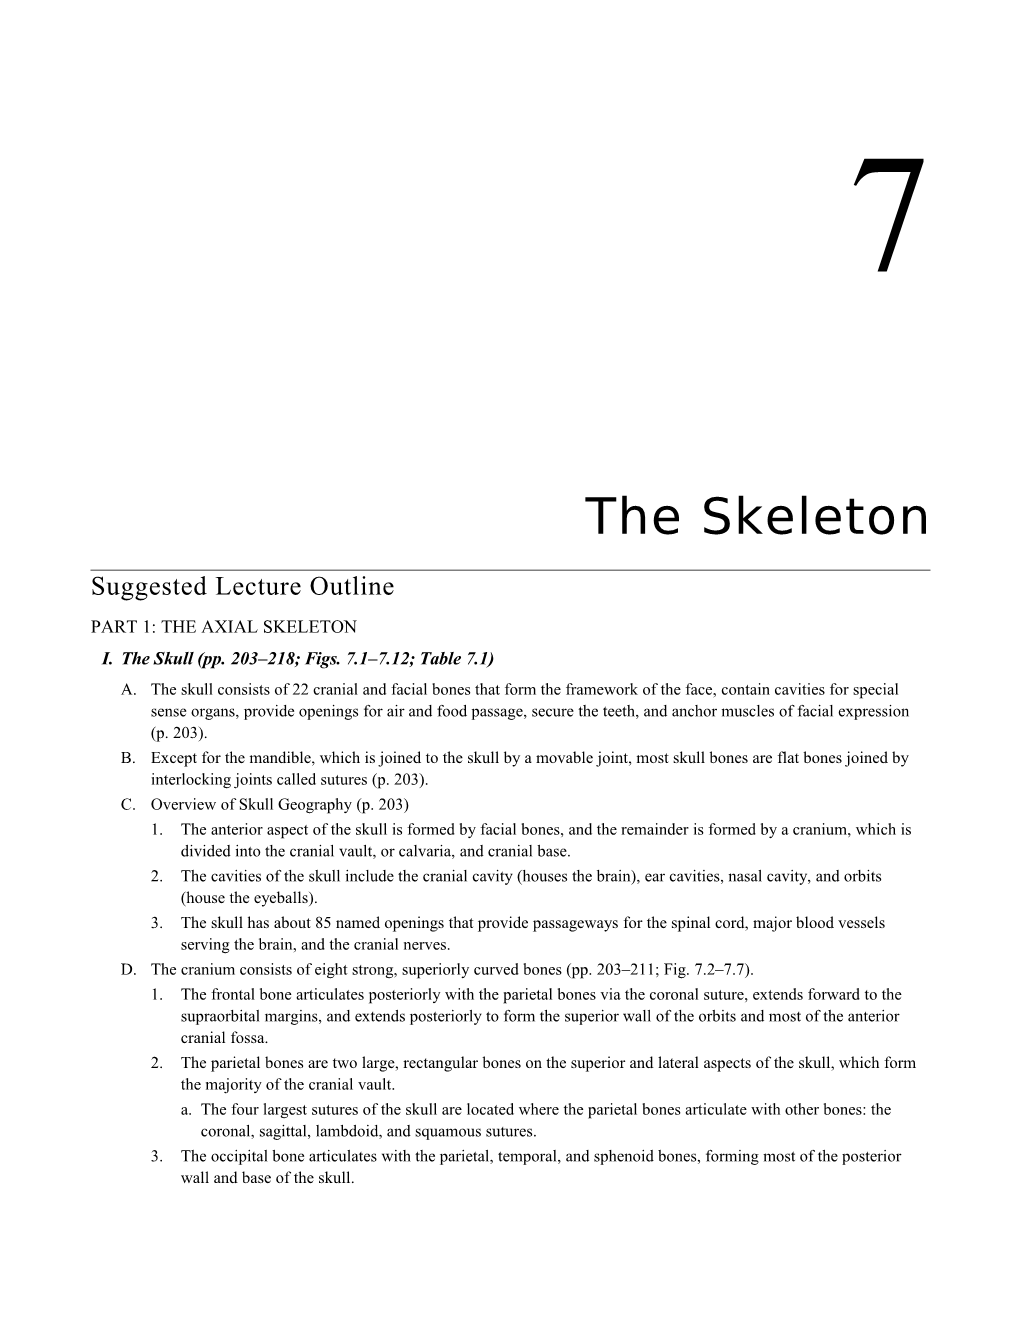 Part 1: the Axial Skeleton